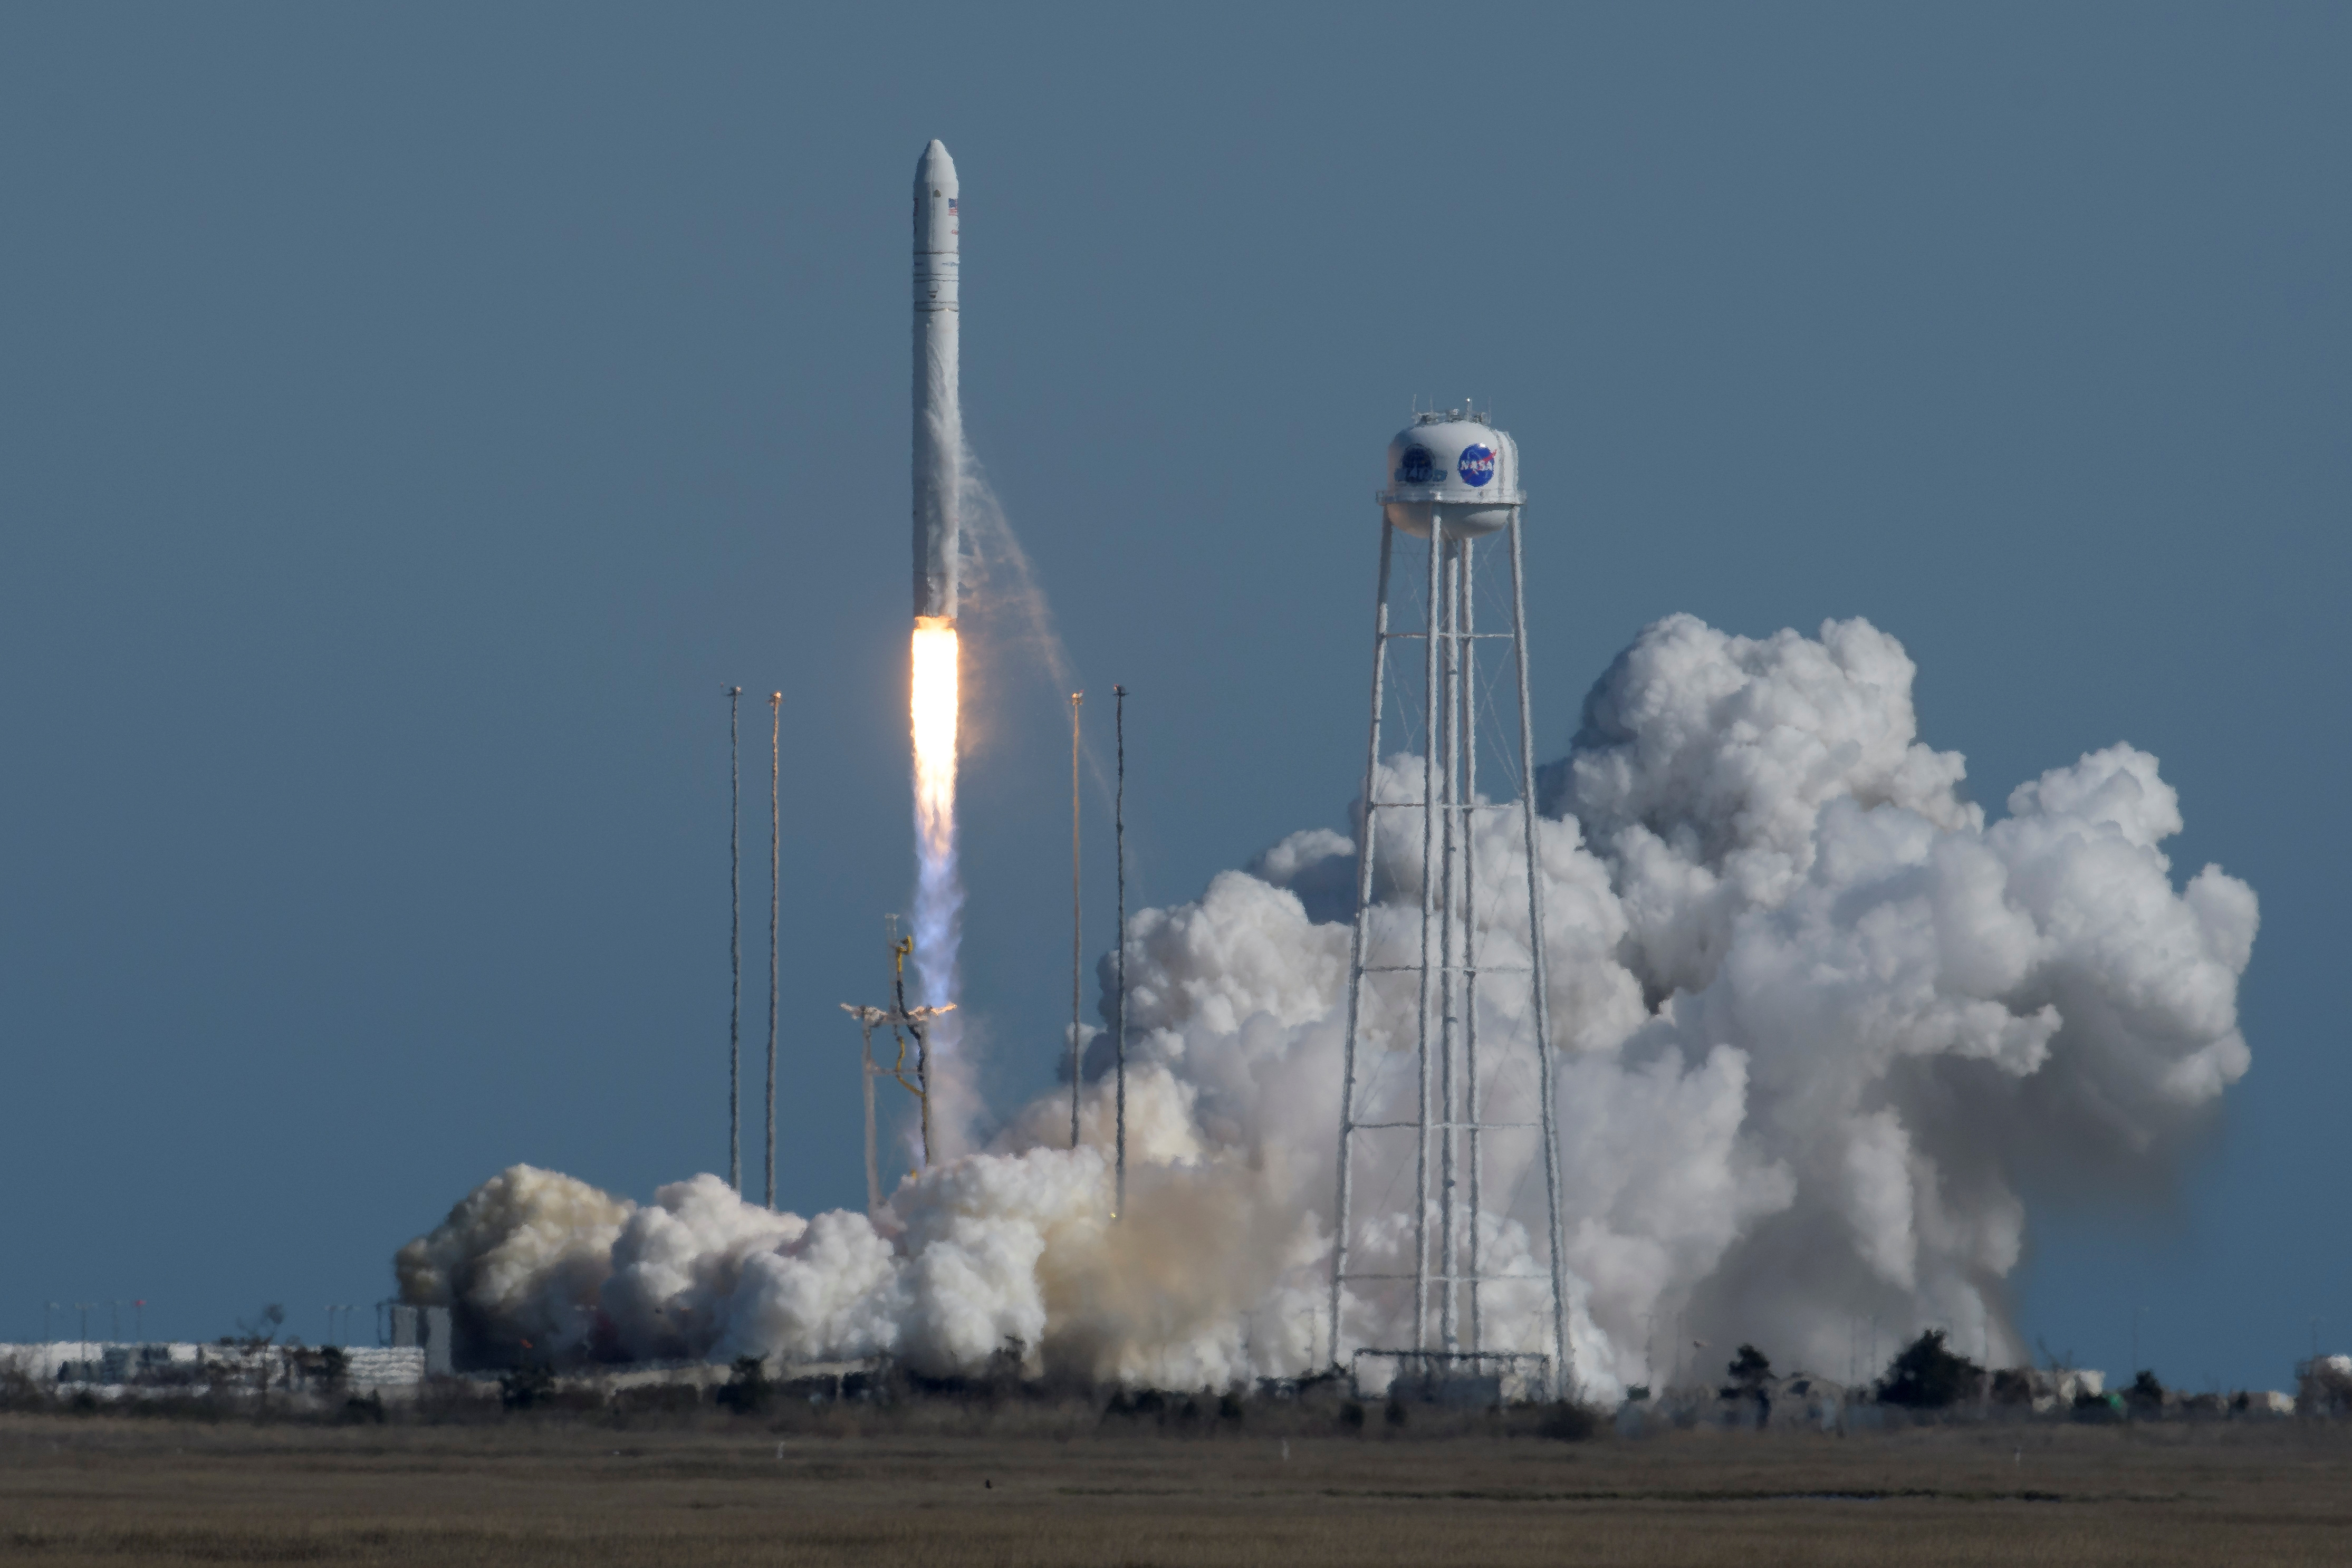 The Northrop Grumman Antares rocket with Cygnus resupply spacecraft onboard launches from Pad-0A at NASA's Wallops Flight Facility in Virginia